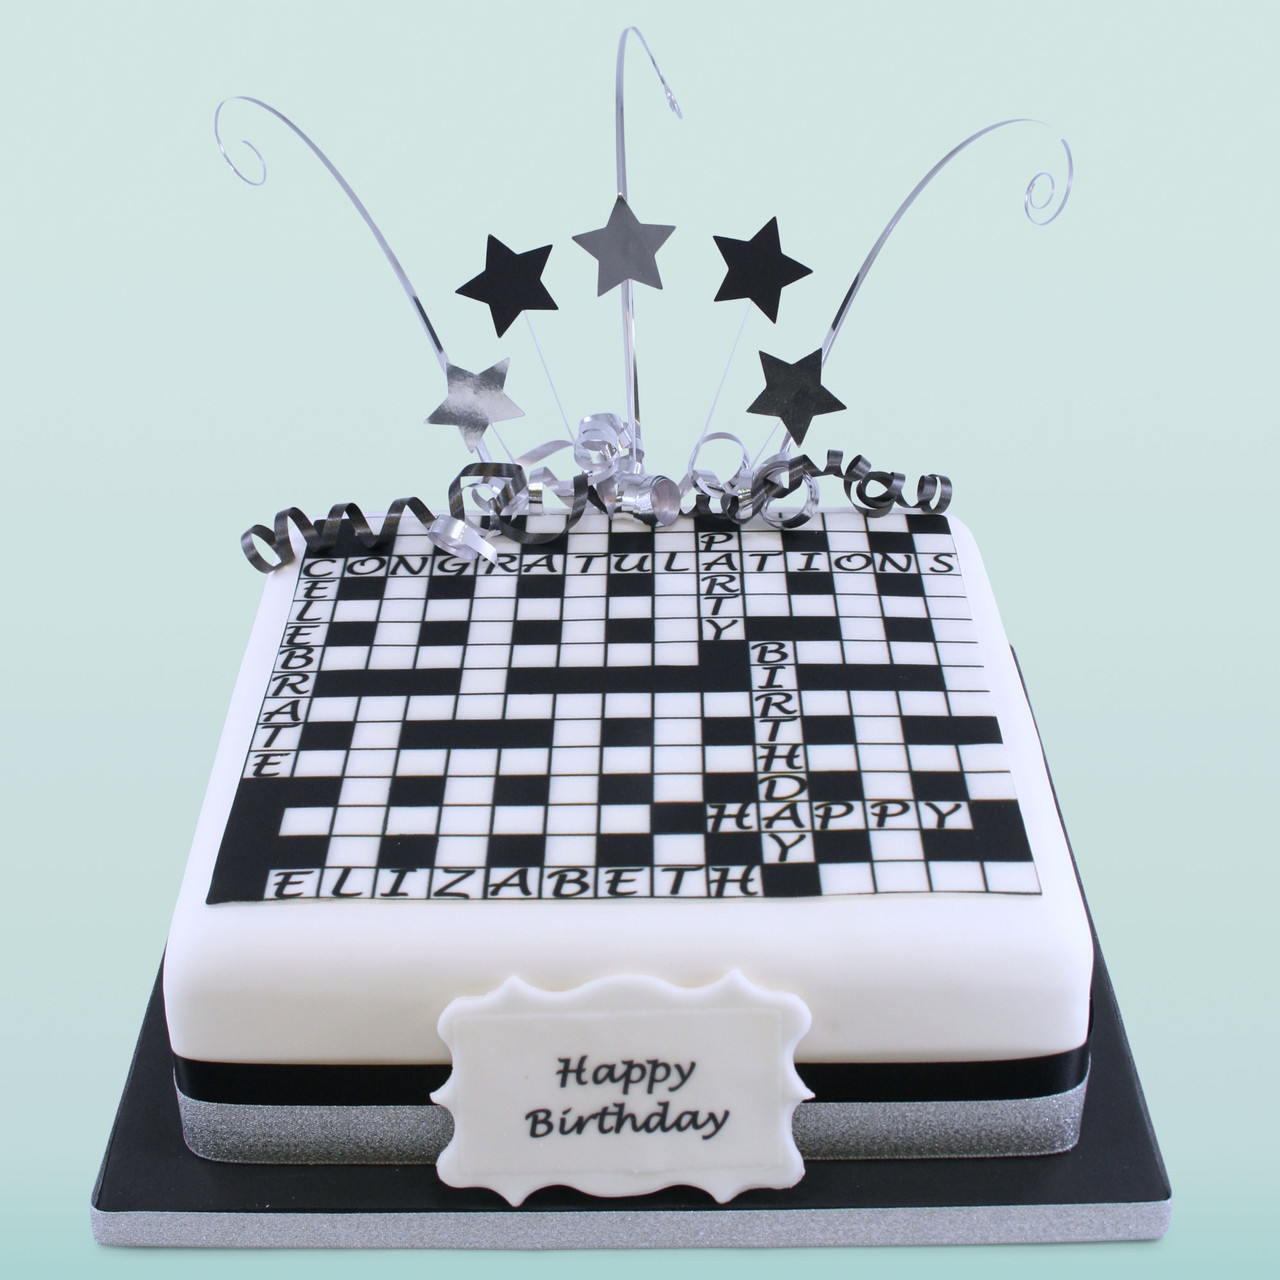 Red Alley Cakes - Word search birthday cake 😊 still some words not  highlighted to be found 😉 an interactive cake 😂 hope you enjoyed it |  Facebook